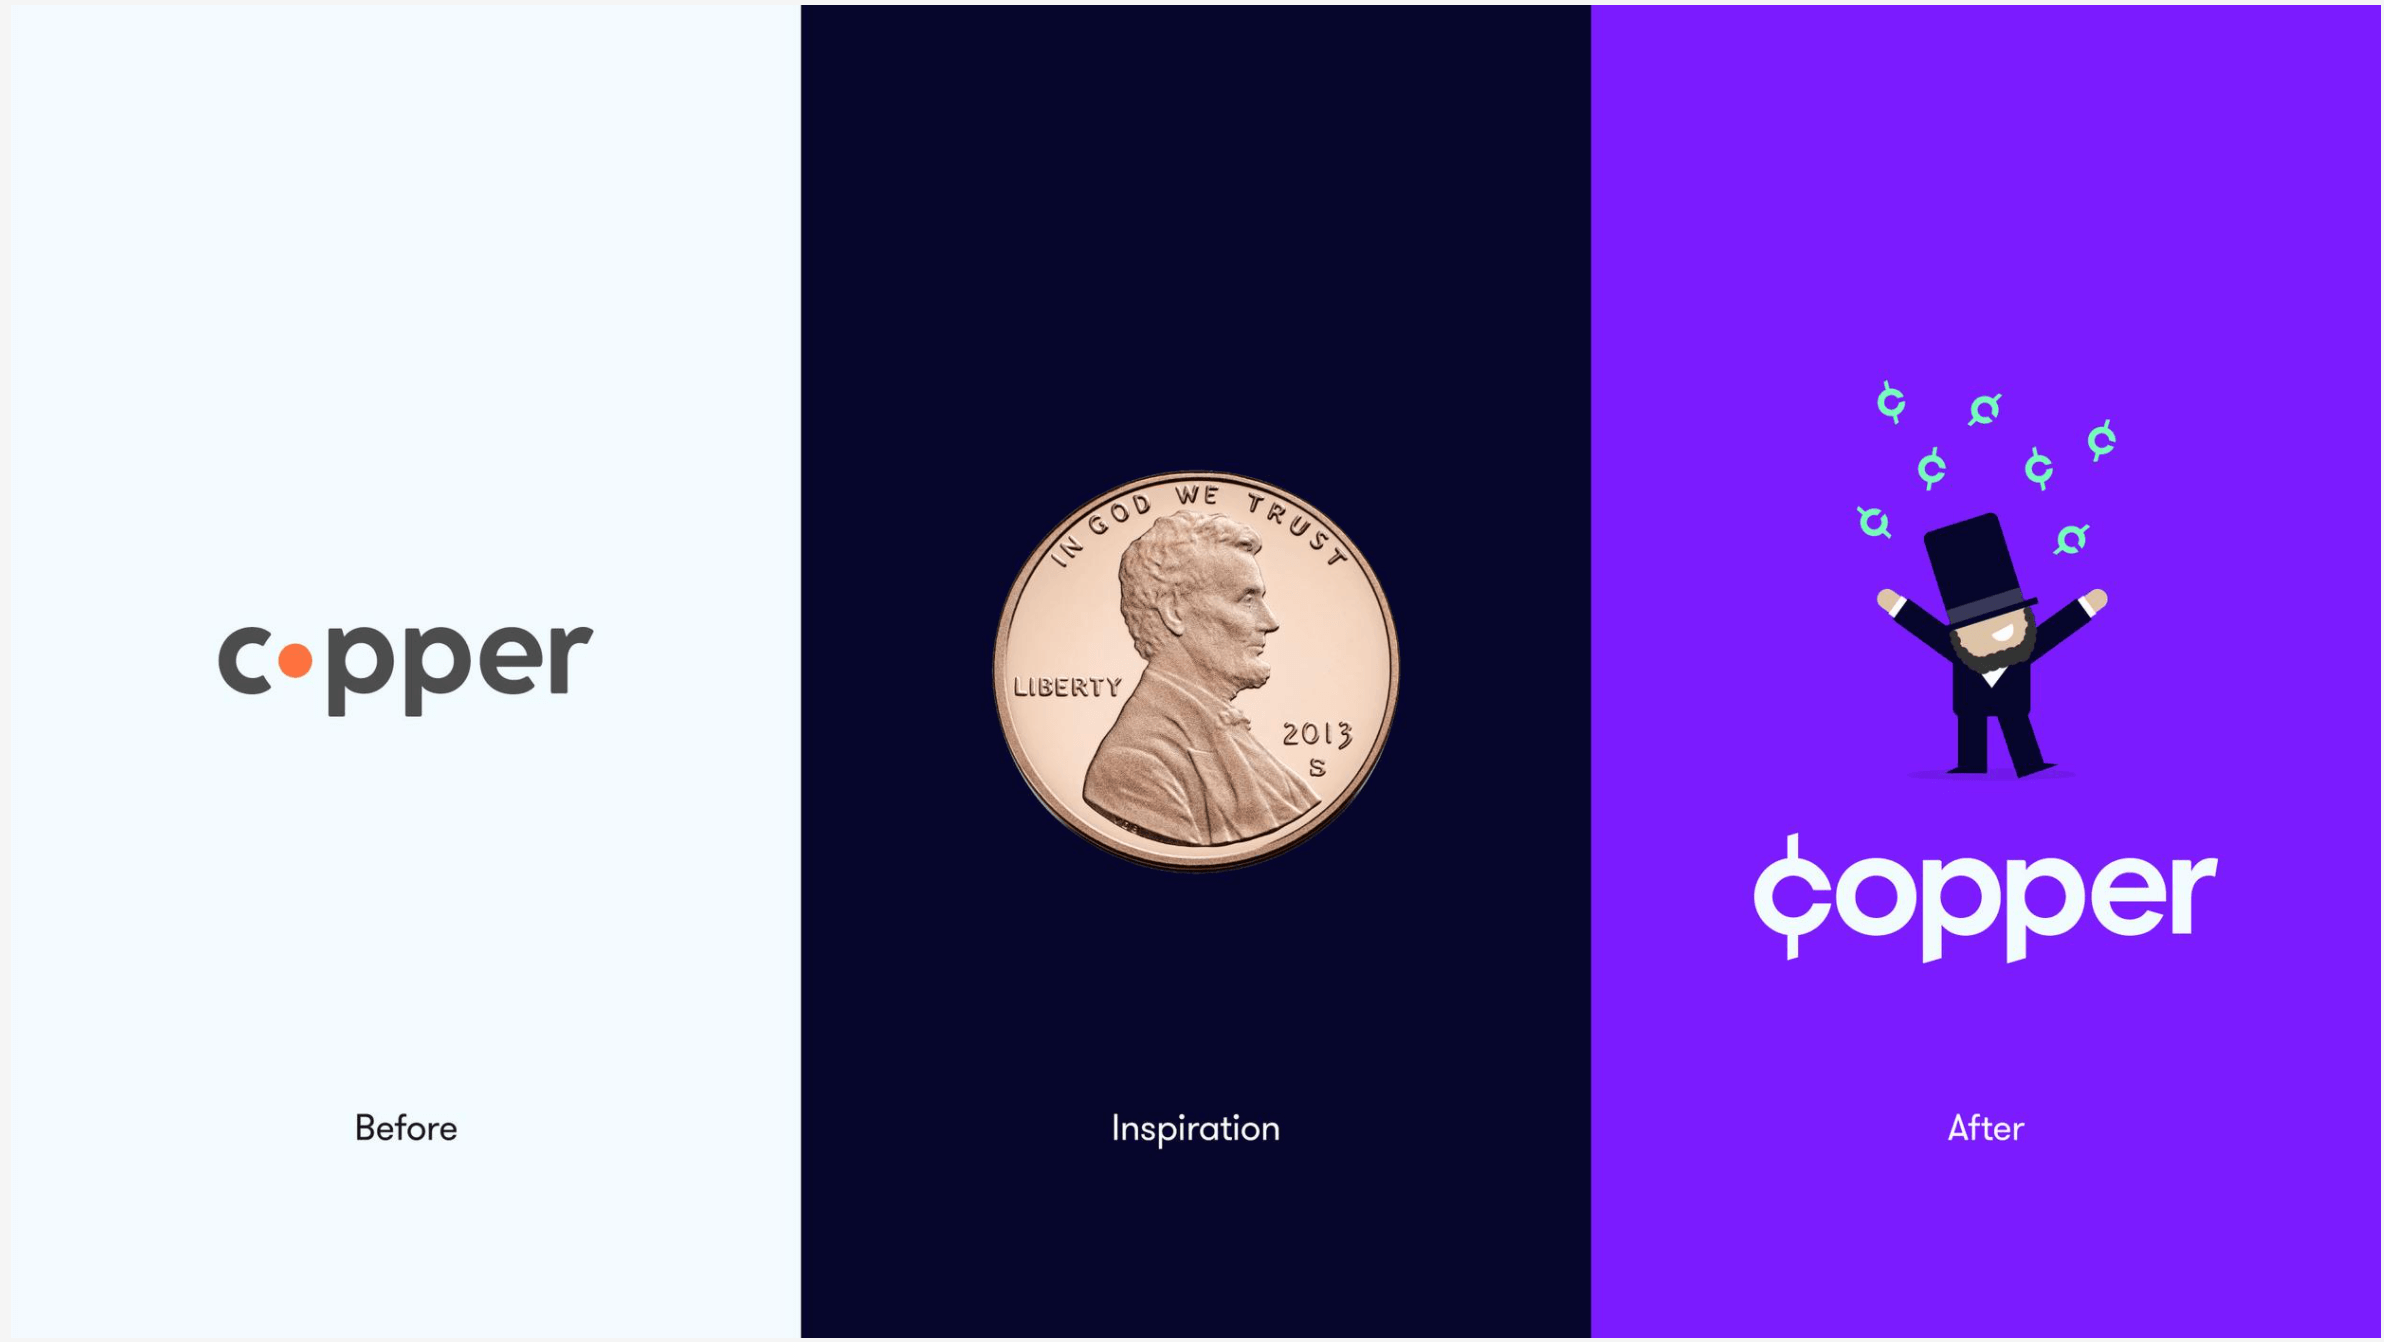 A comparison between the old and new logo for Copper